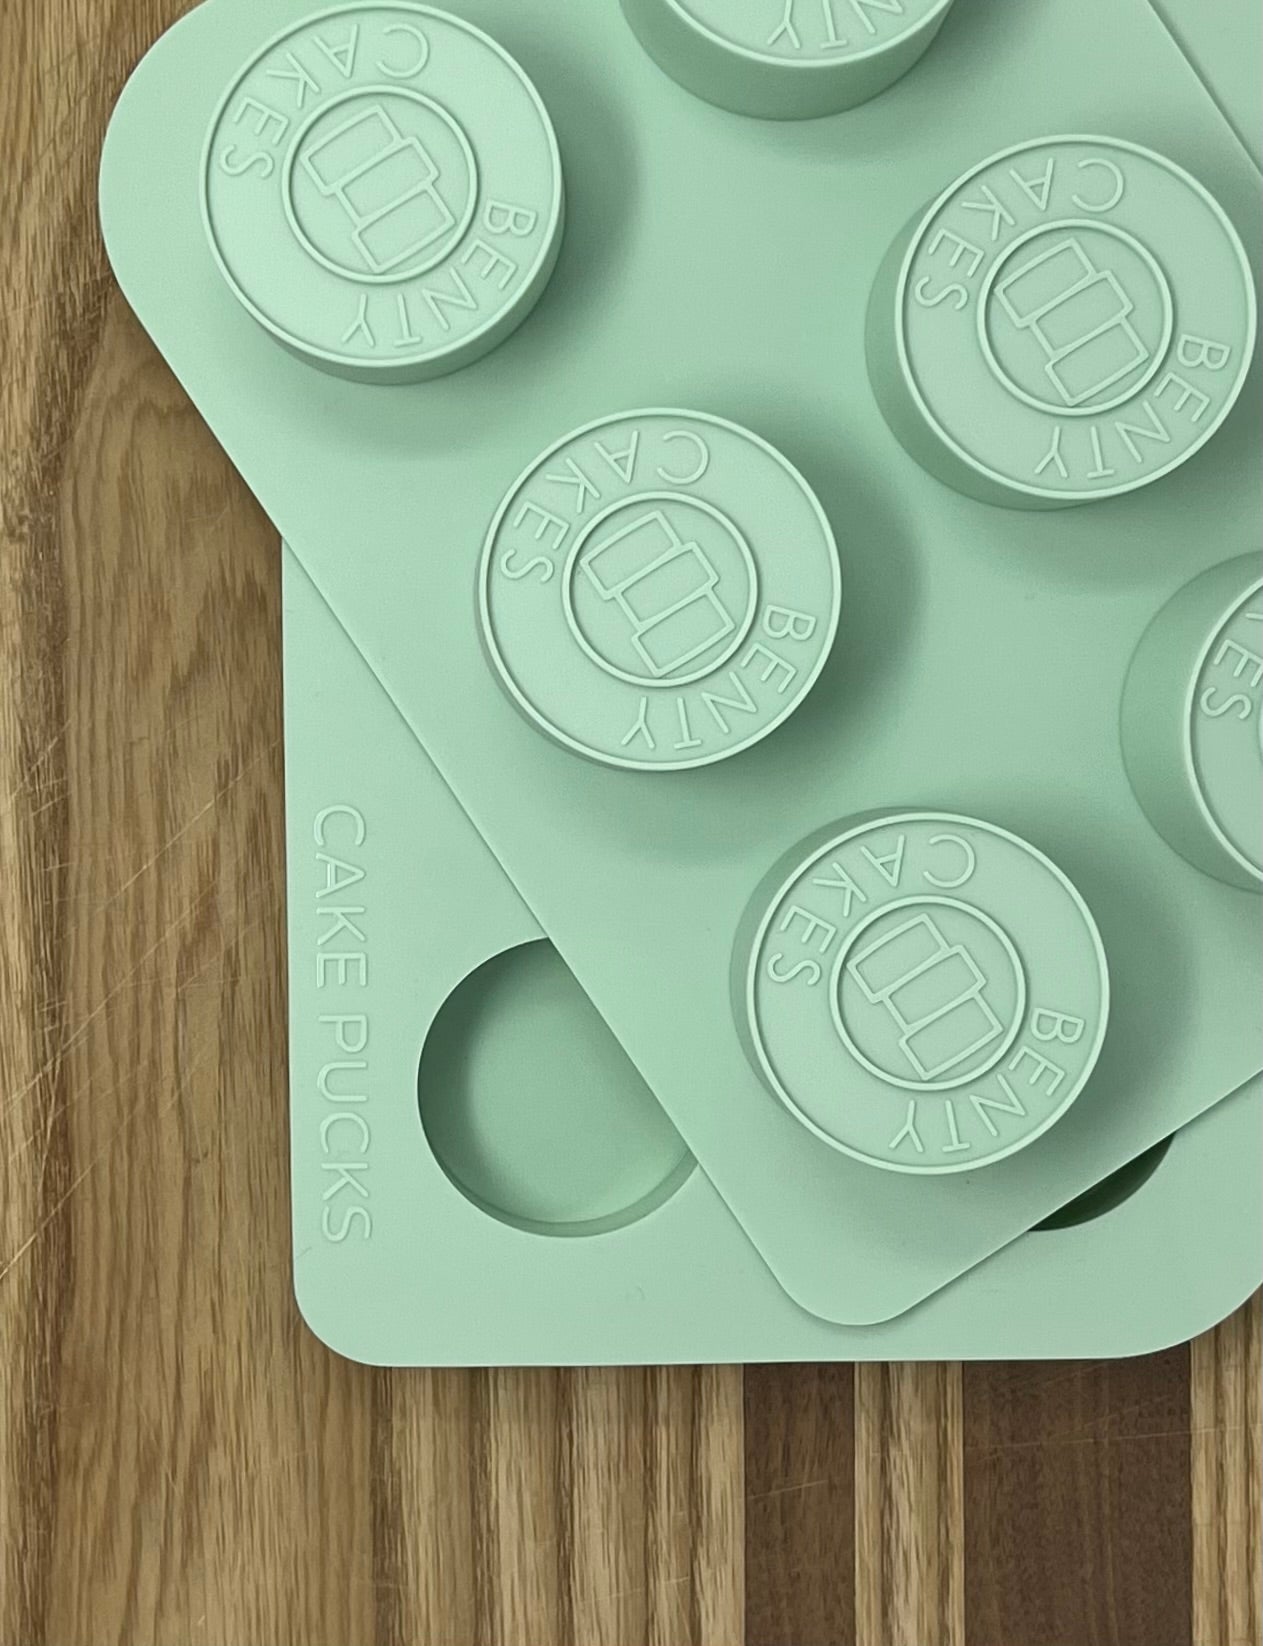 The Benty cakes mold set will make you look like a pro without the hea